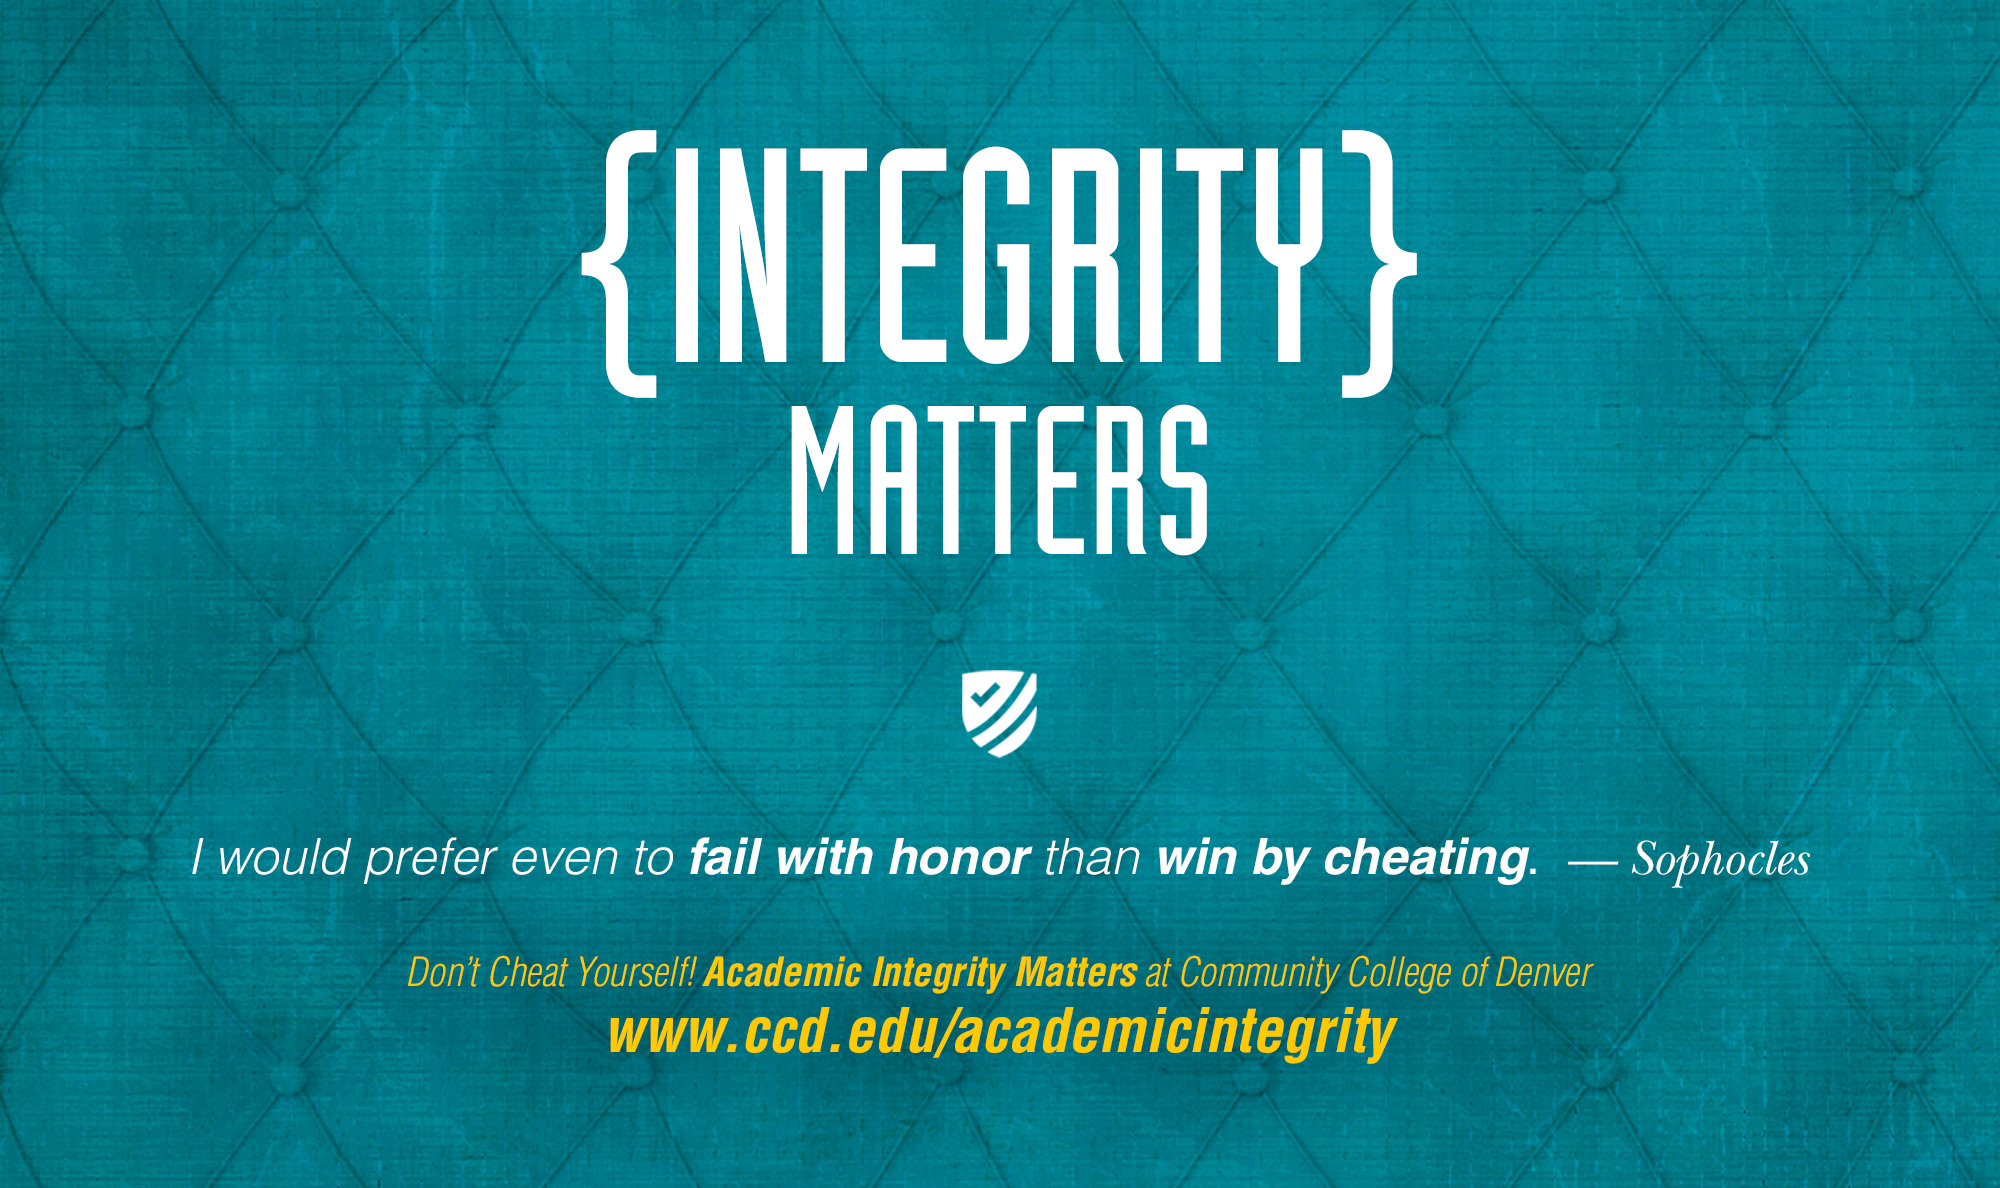 aqua poster with text "Integrity Matters"